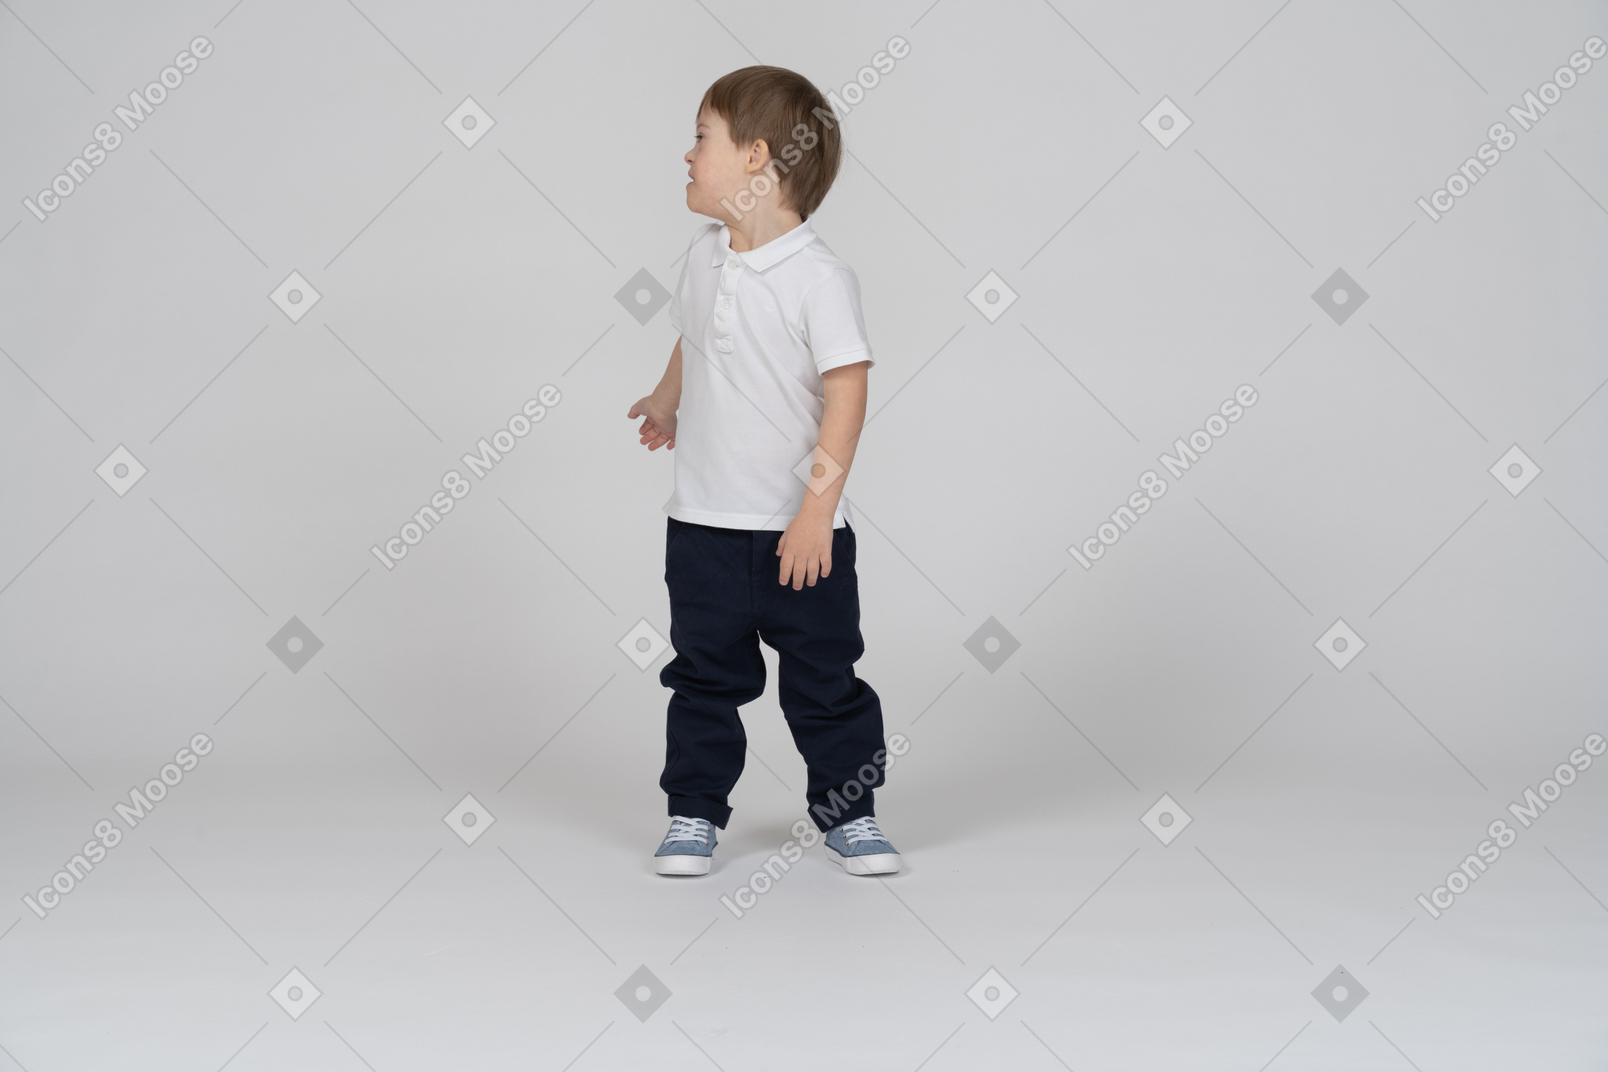 Front view of a little boy turning around